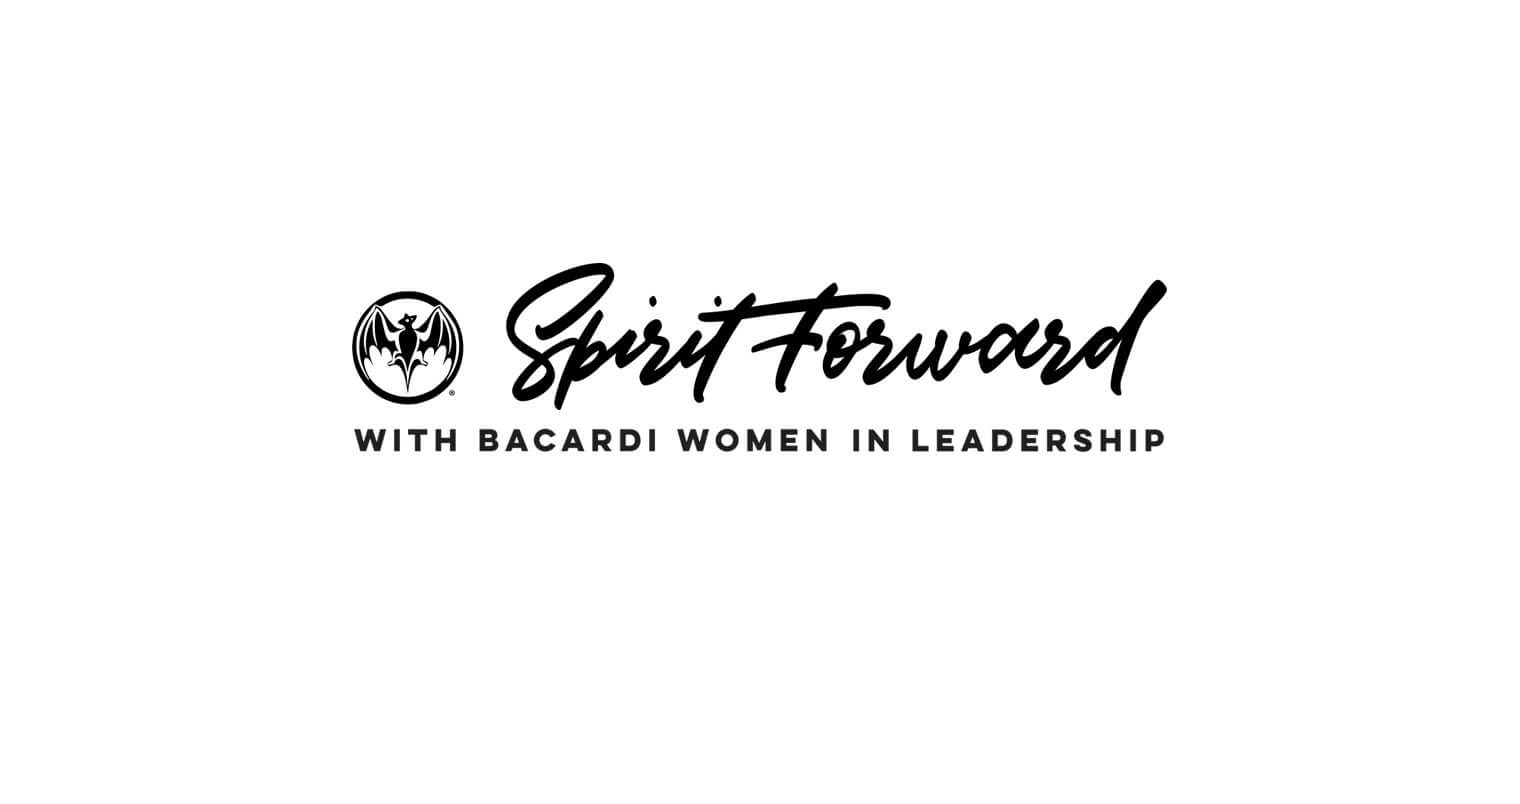 Spirit Forward Bacardi Women In Leadership Empowerment Series Launches, featured image, logo on white